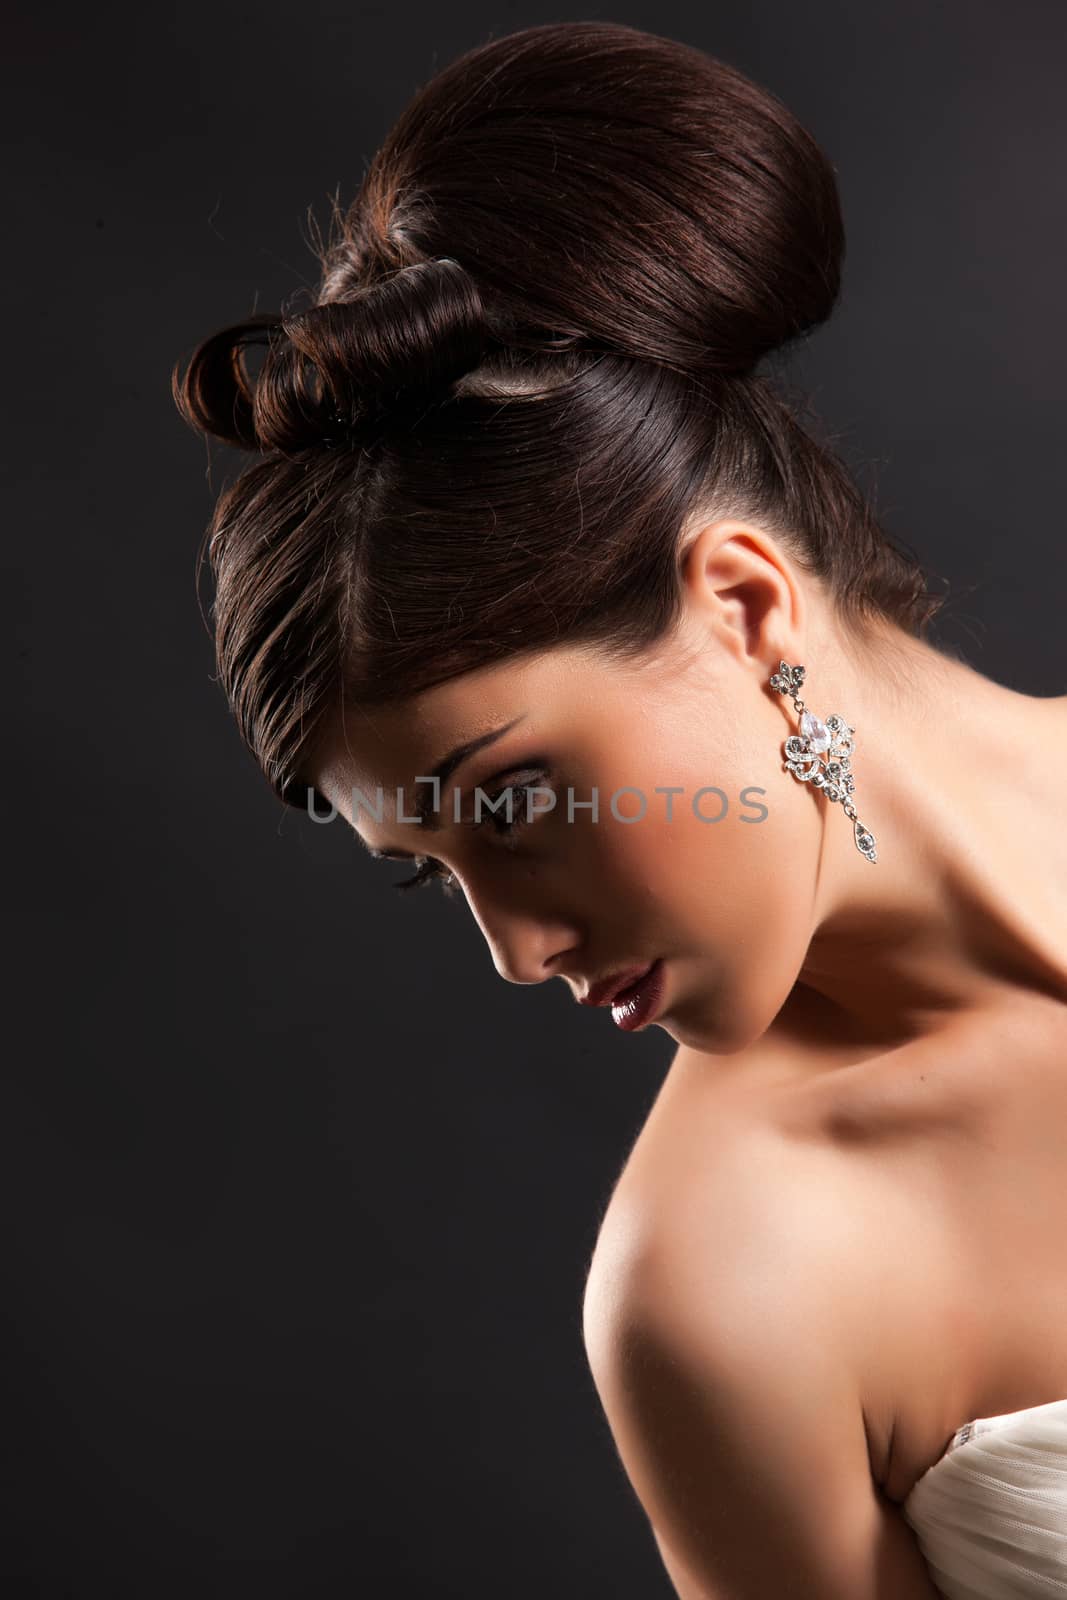 Young beautiful woman in a wedding dress on a black studio background